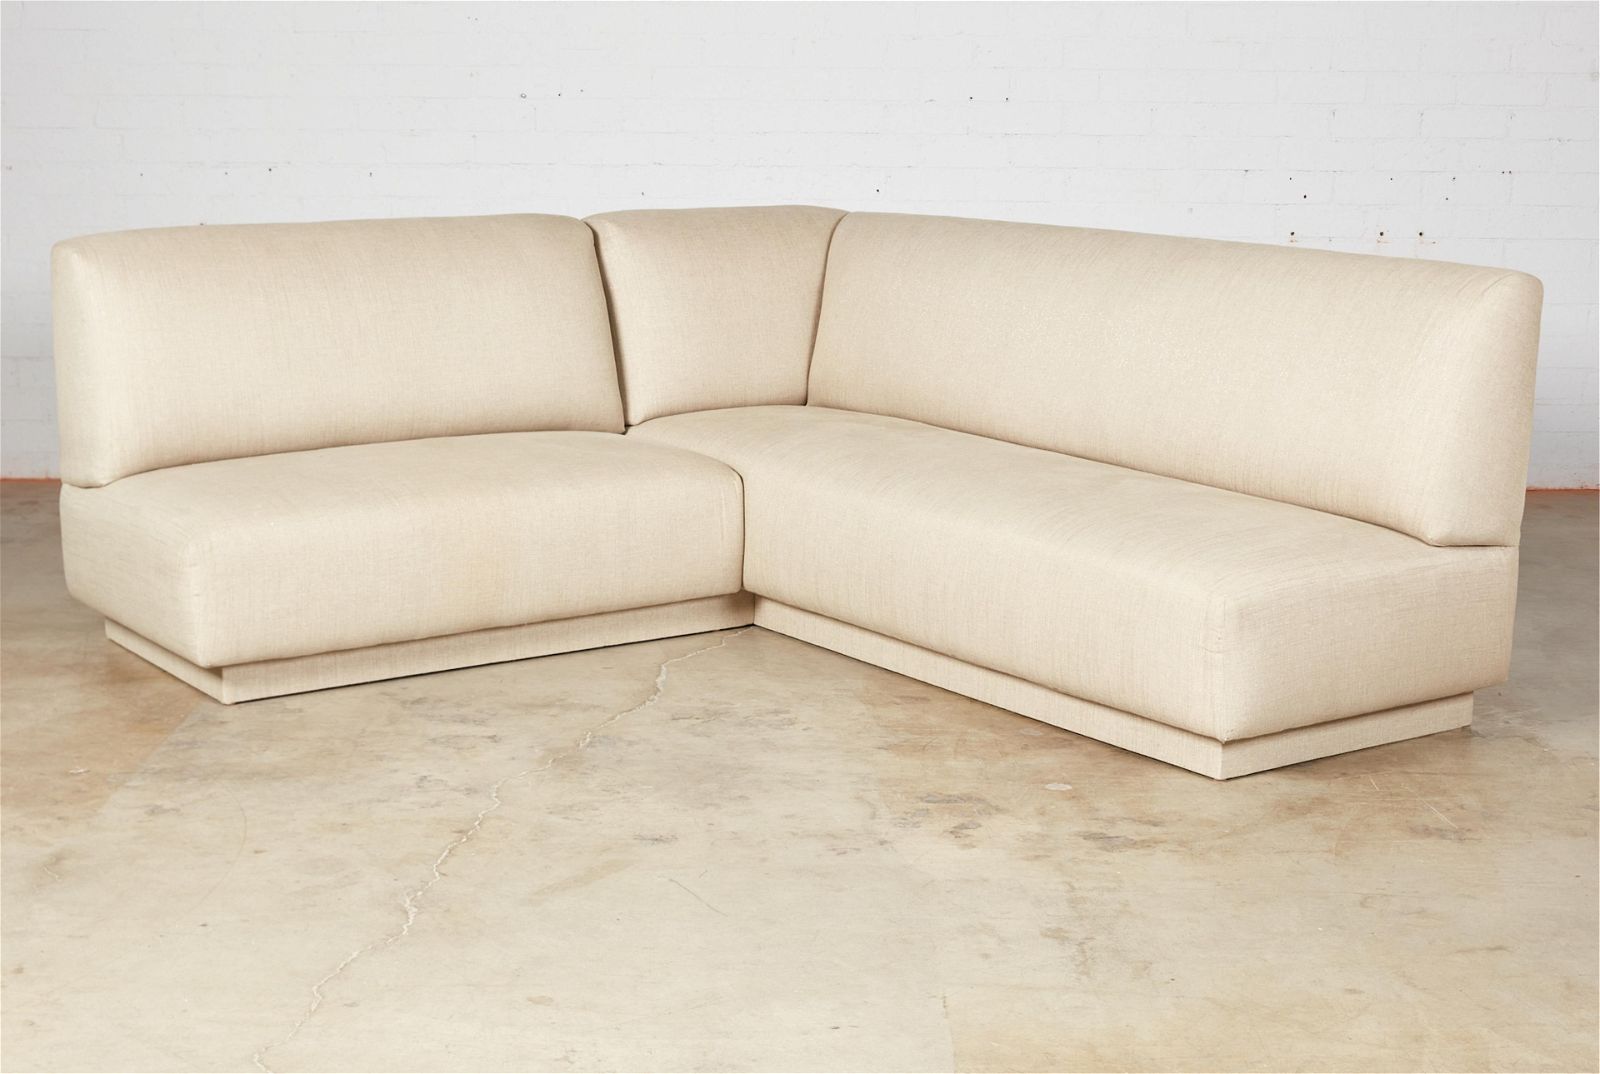 A CONTEMPORARY FULLY UPHOLSTERED 2fb43b0